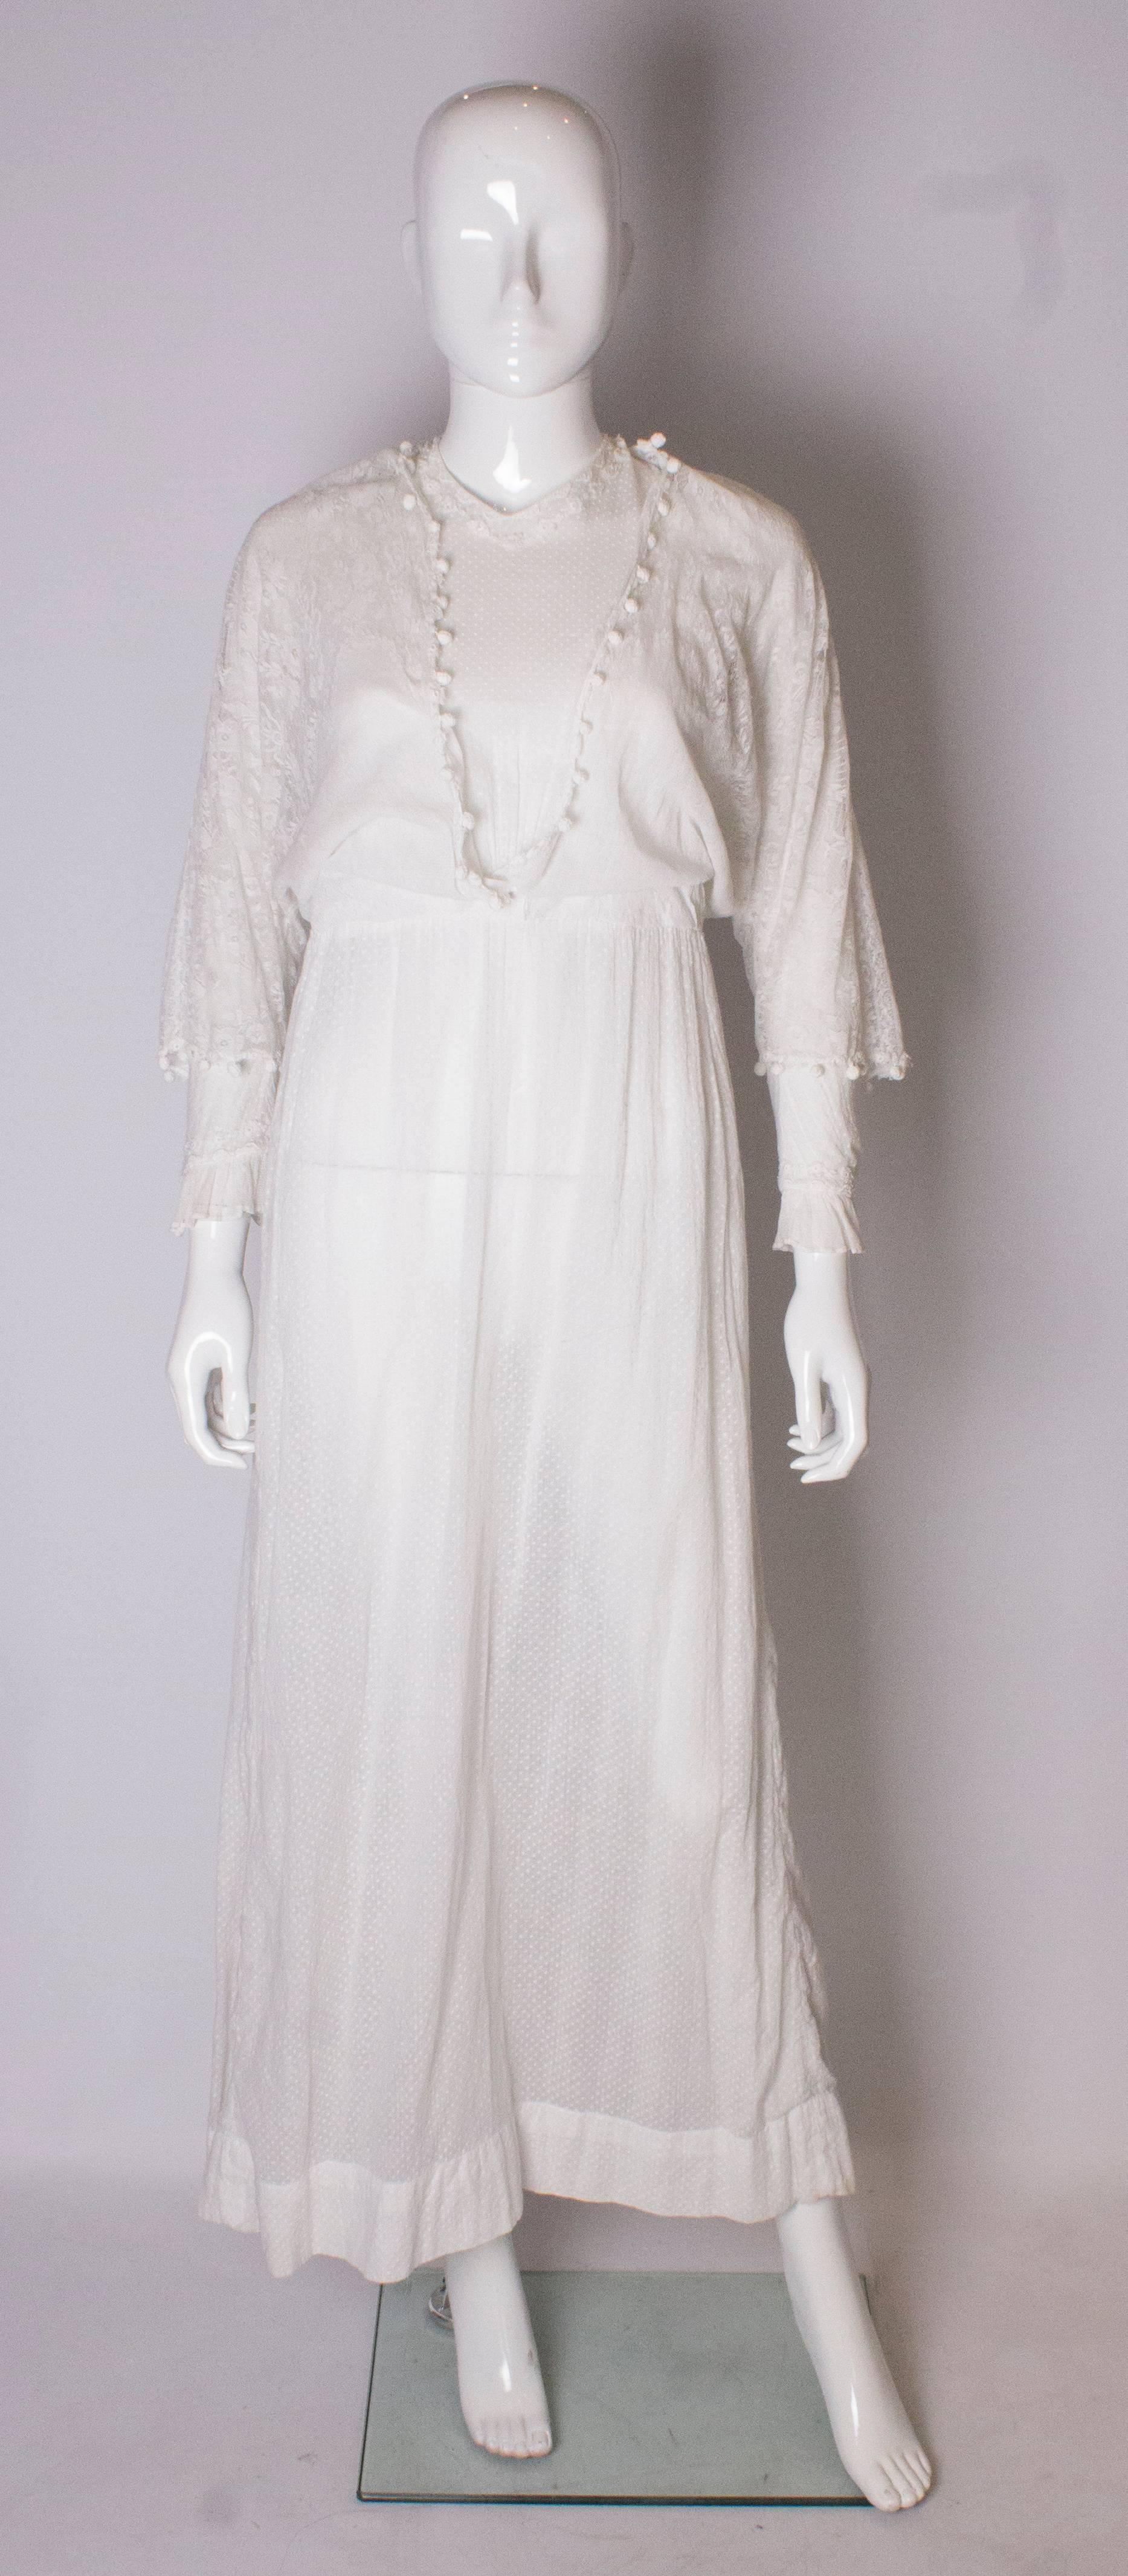 A pretty white Edwardian dress, with cotton spot detail . The dress has lace over the sleeves and bodice front, and back.. The sleeves have a lace detail at the cuffs, and the bodice has a  pleat detail. It fastens with hooks and eyes at the back.